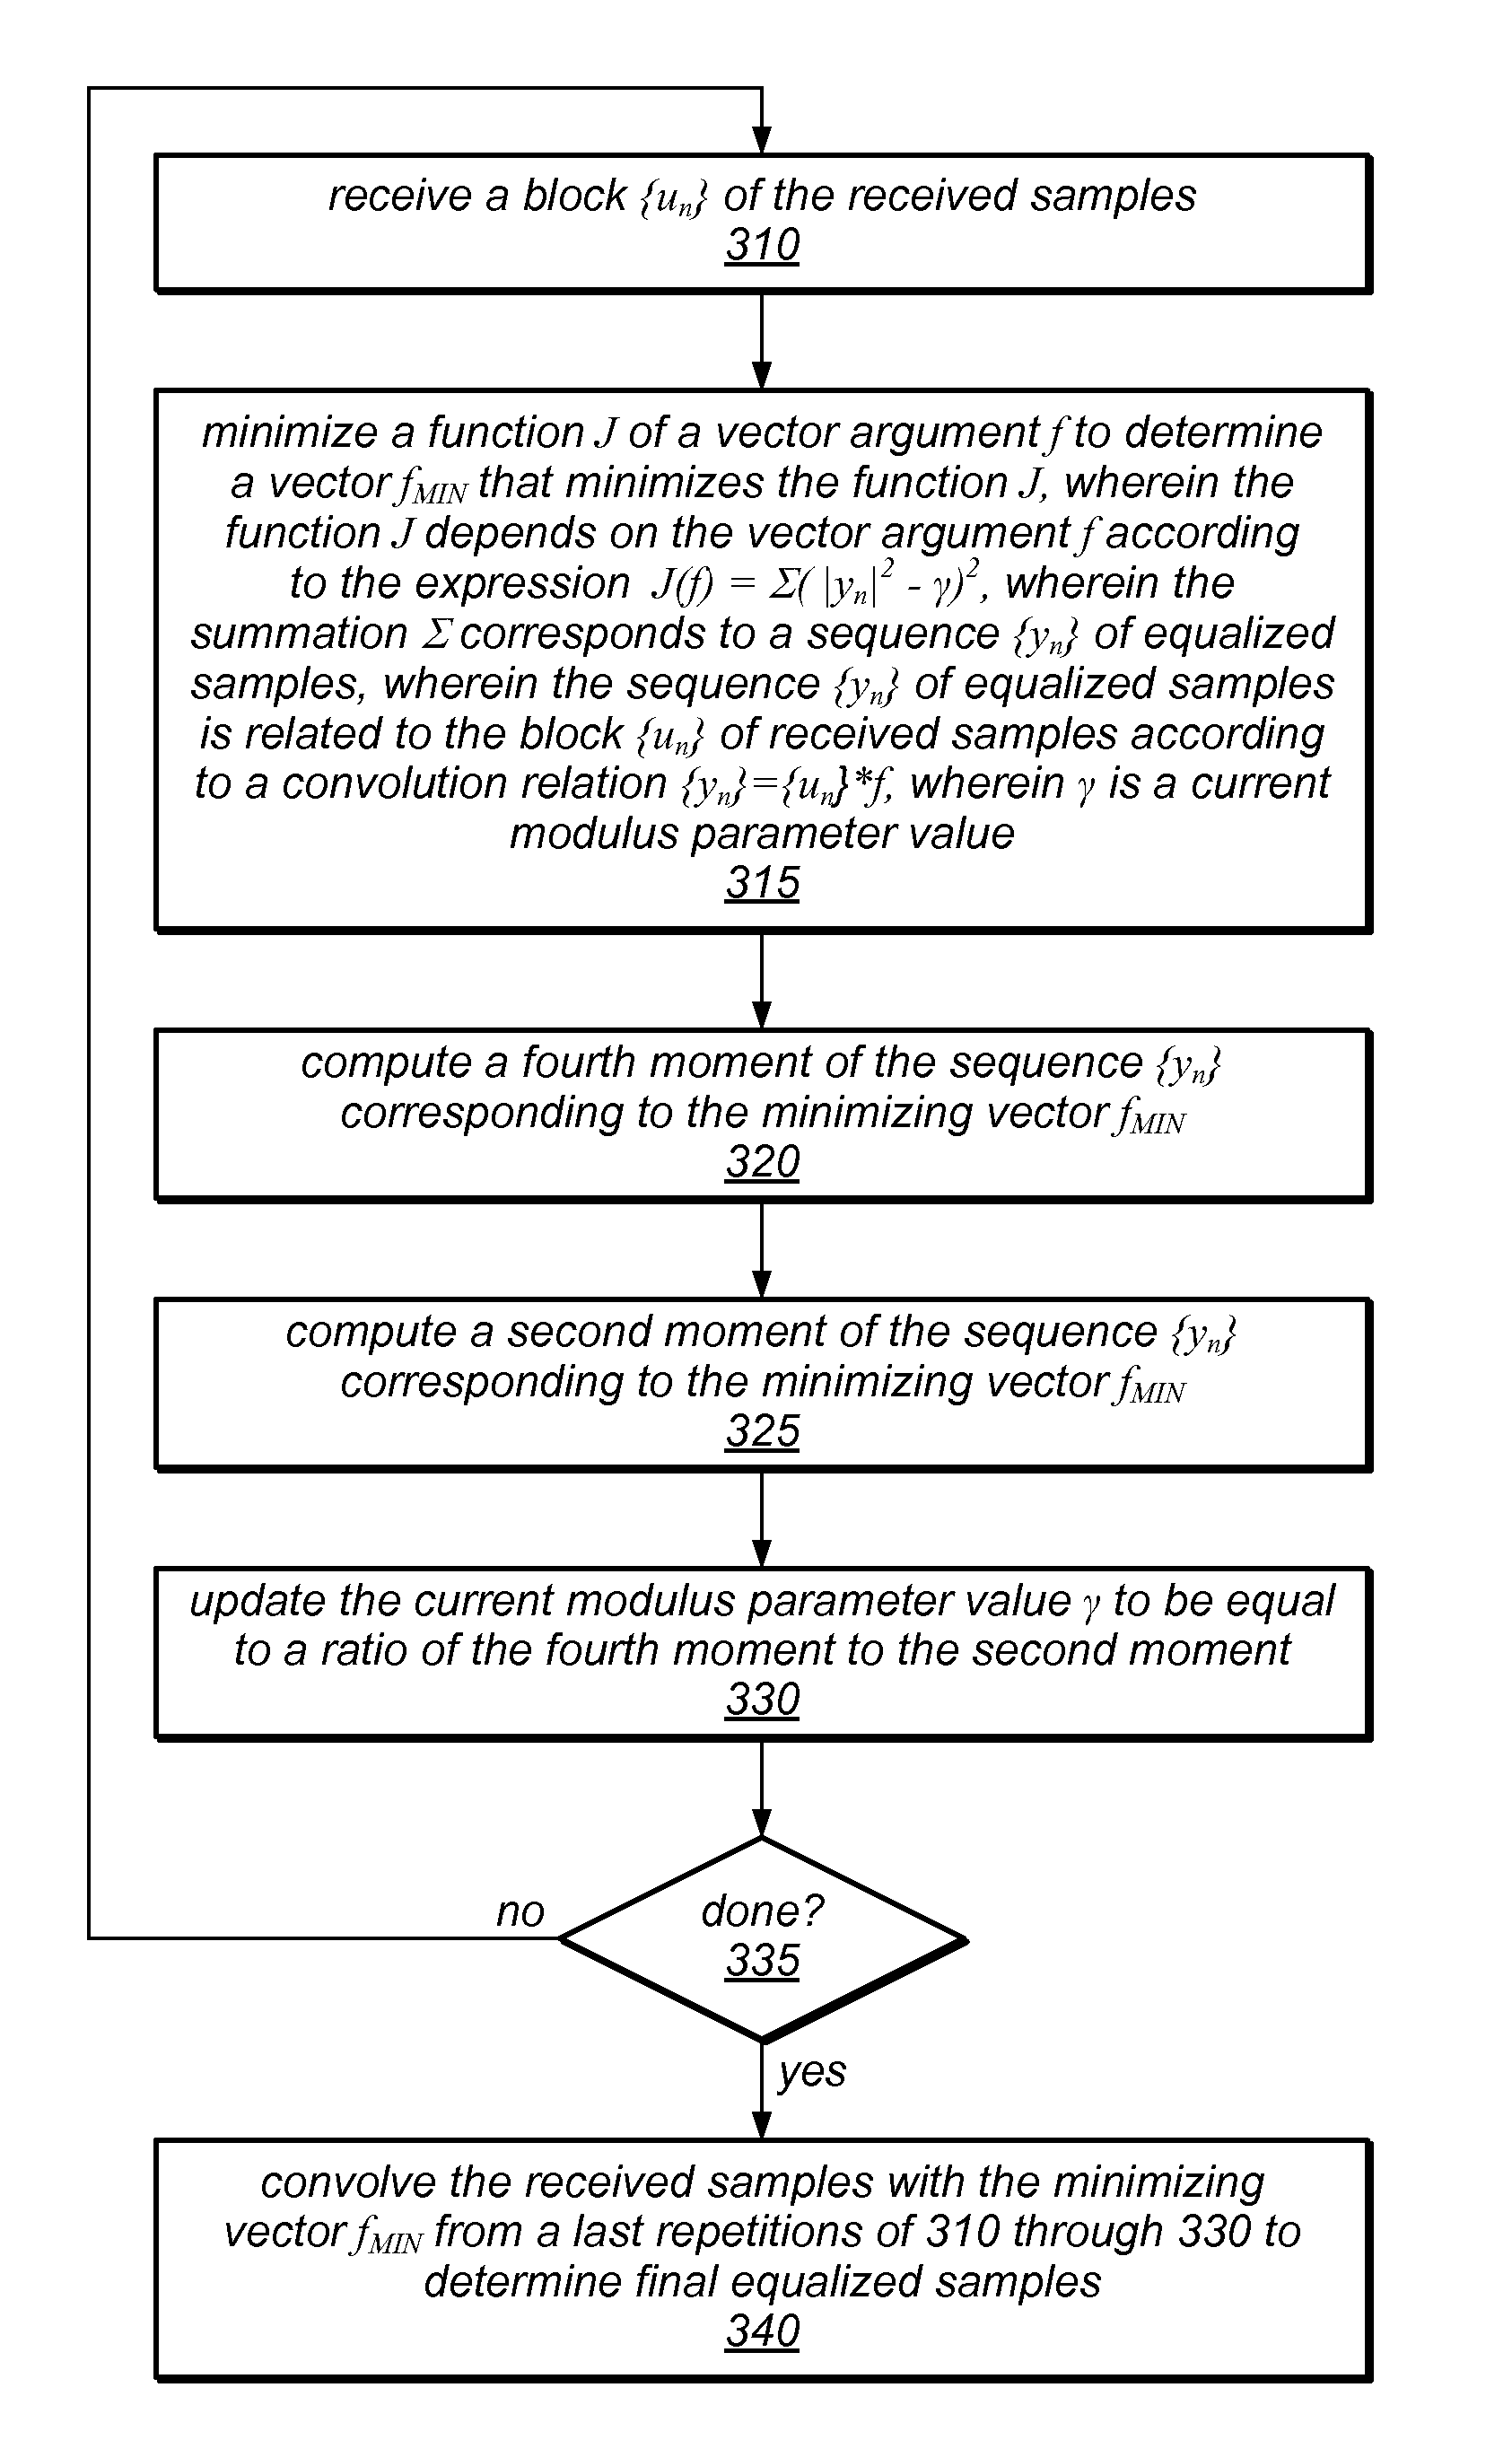 Variable Modulus Mechanism for Performing Equalization Without A Priori Knowledge of Modulation Type or Constellation Order